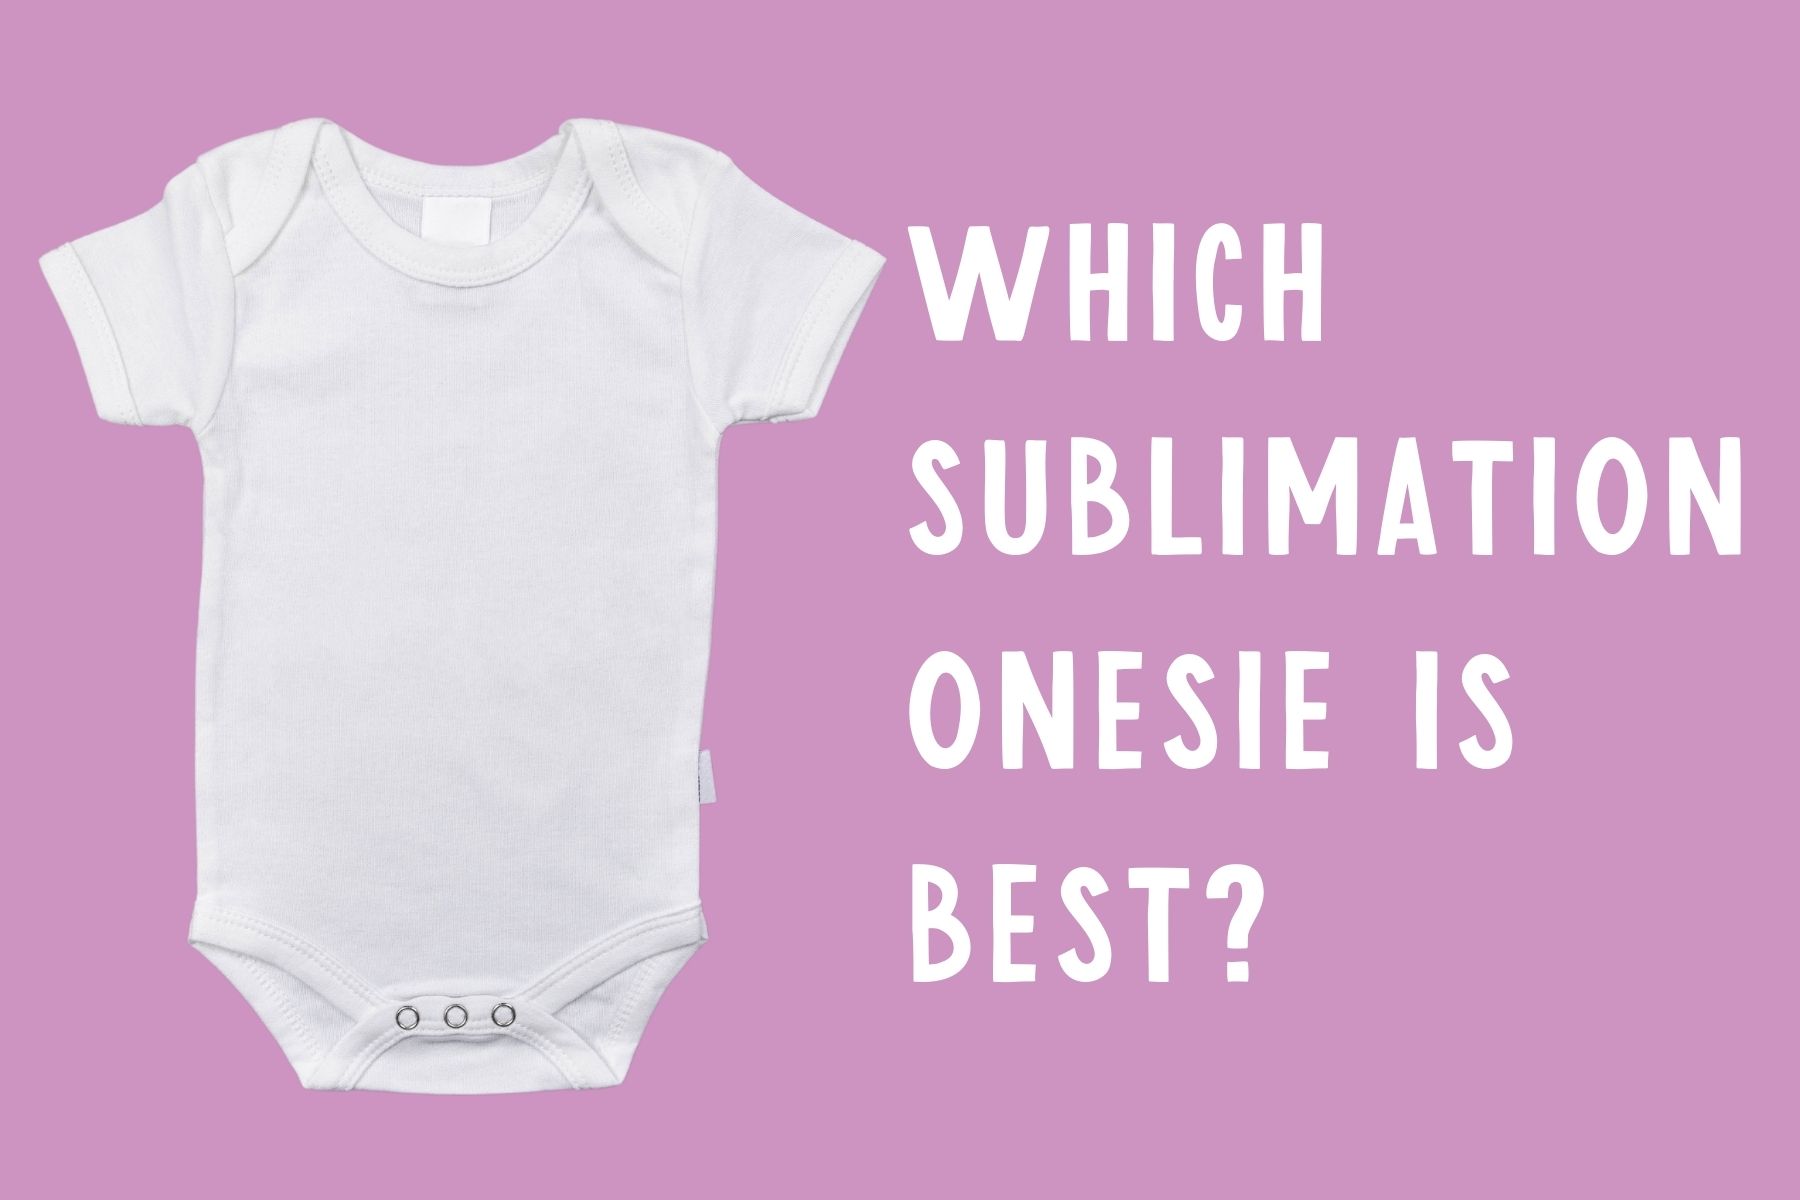 Which sublimation onesie is best